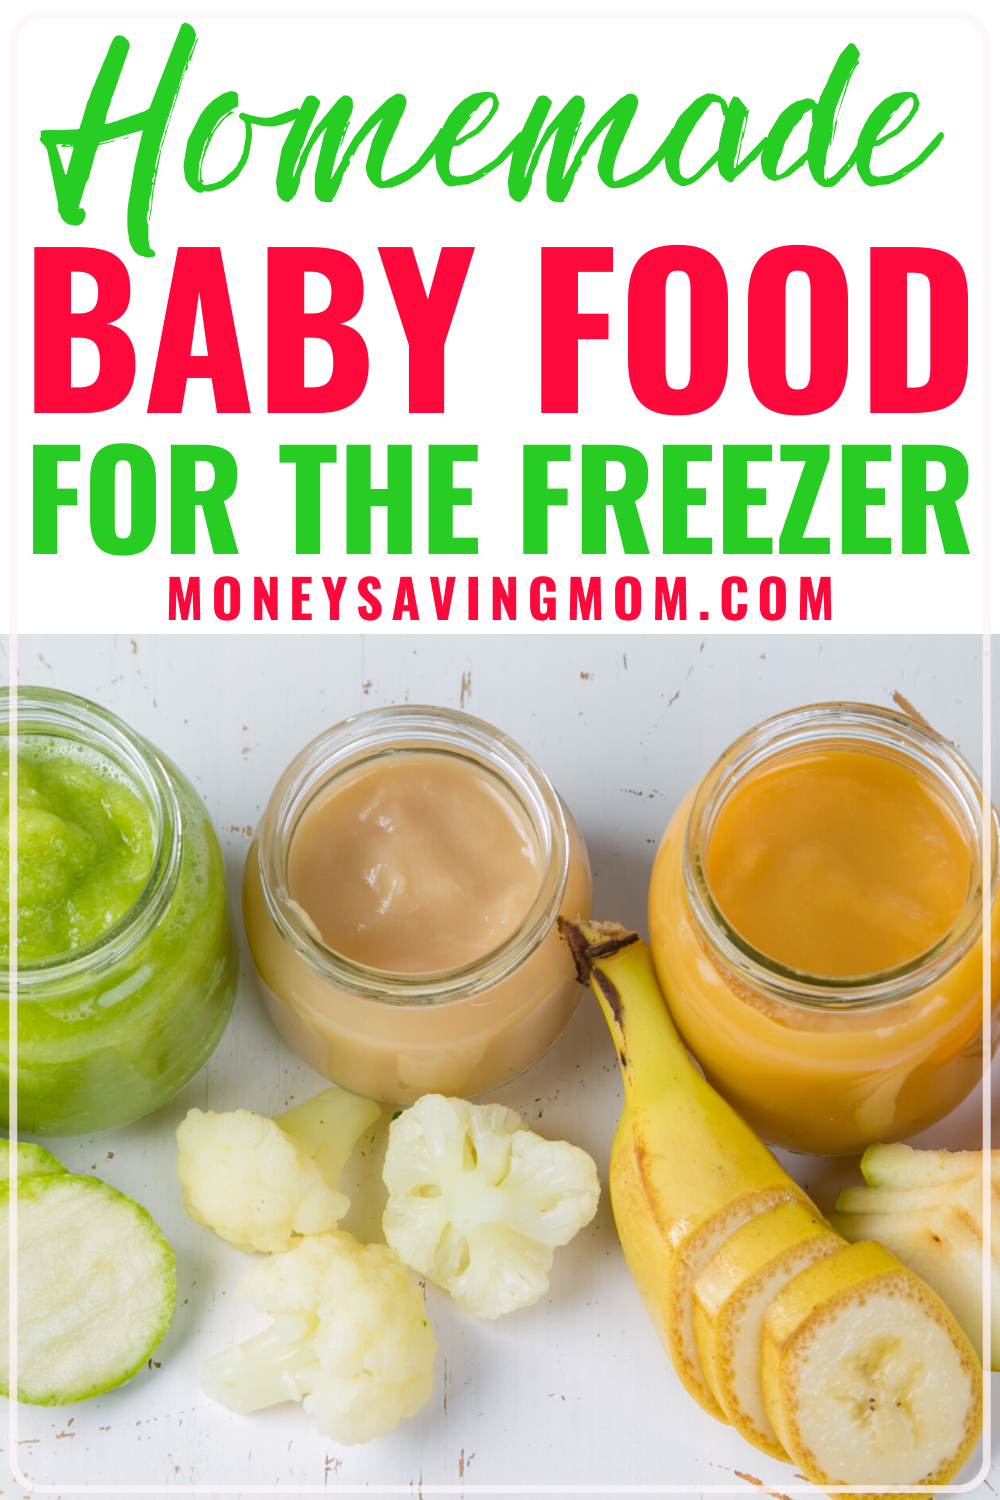 Homemade Baby Food for the Freezer